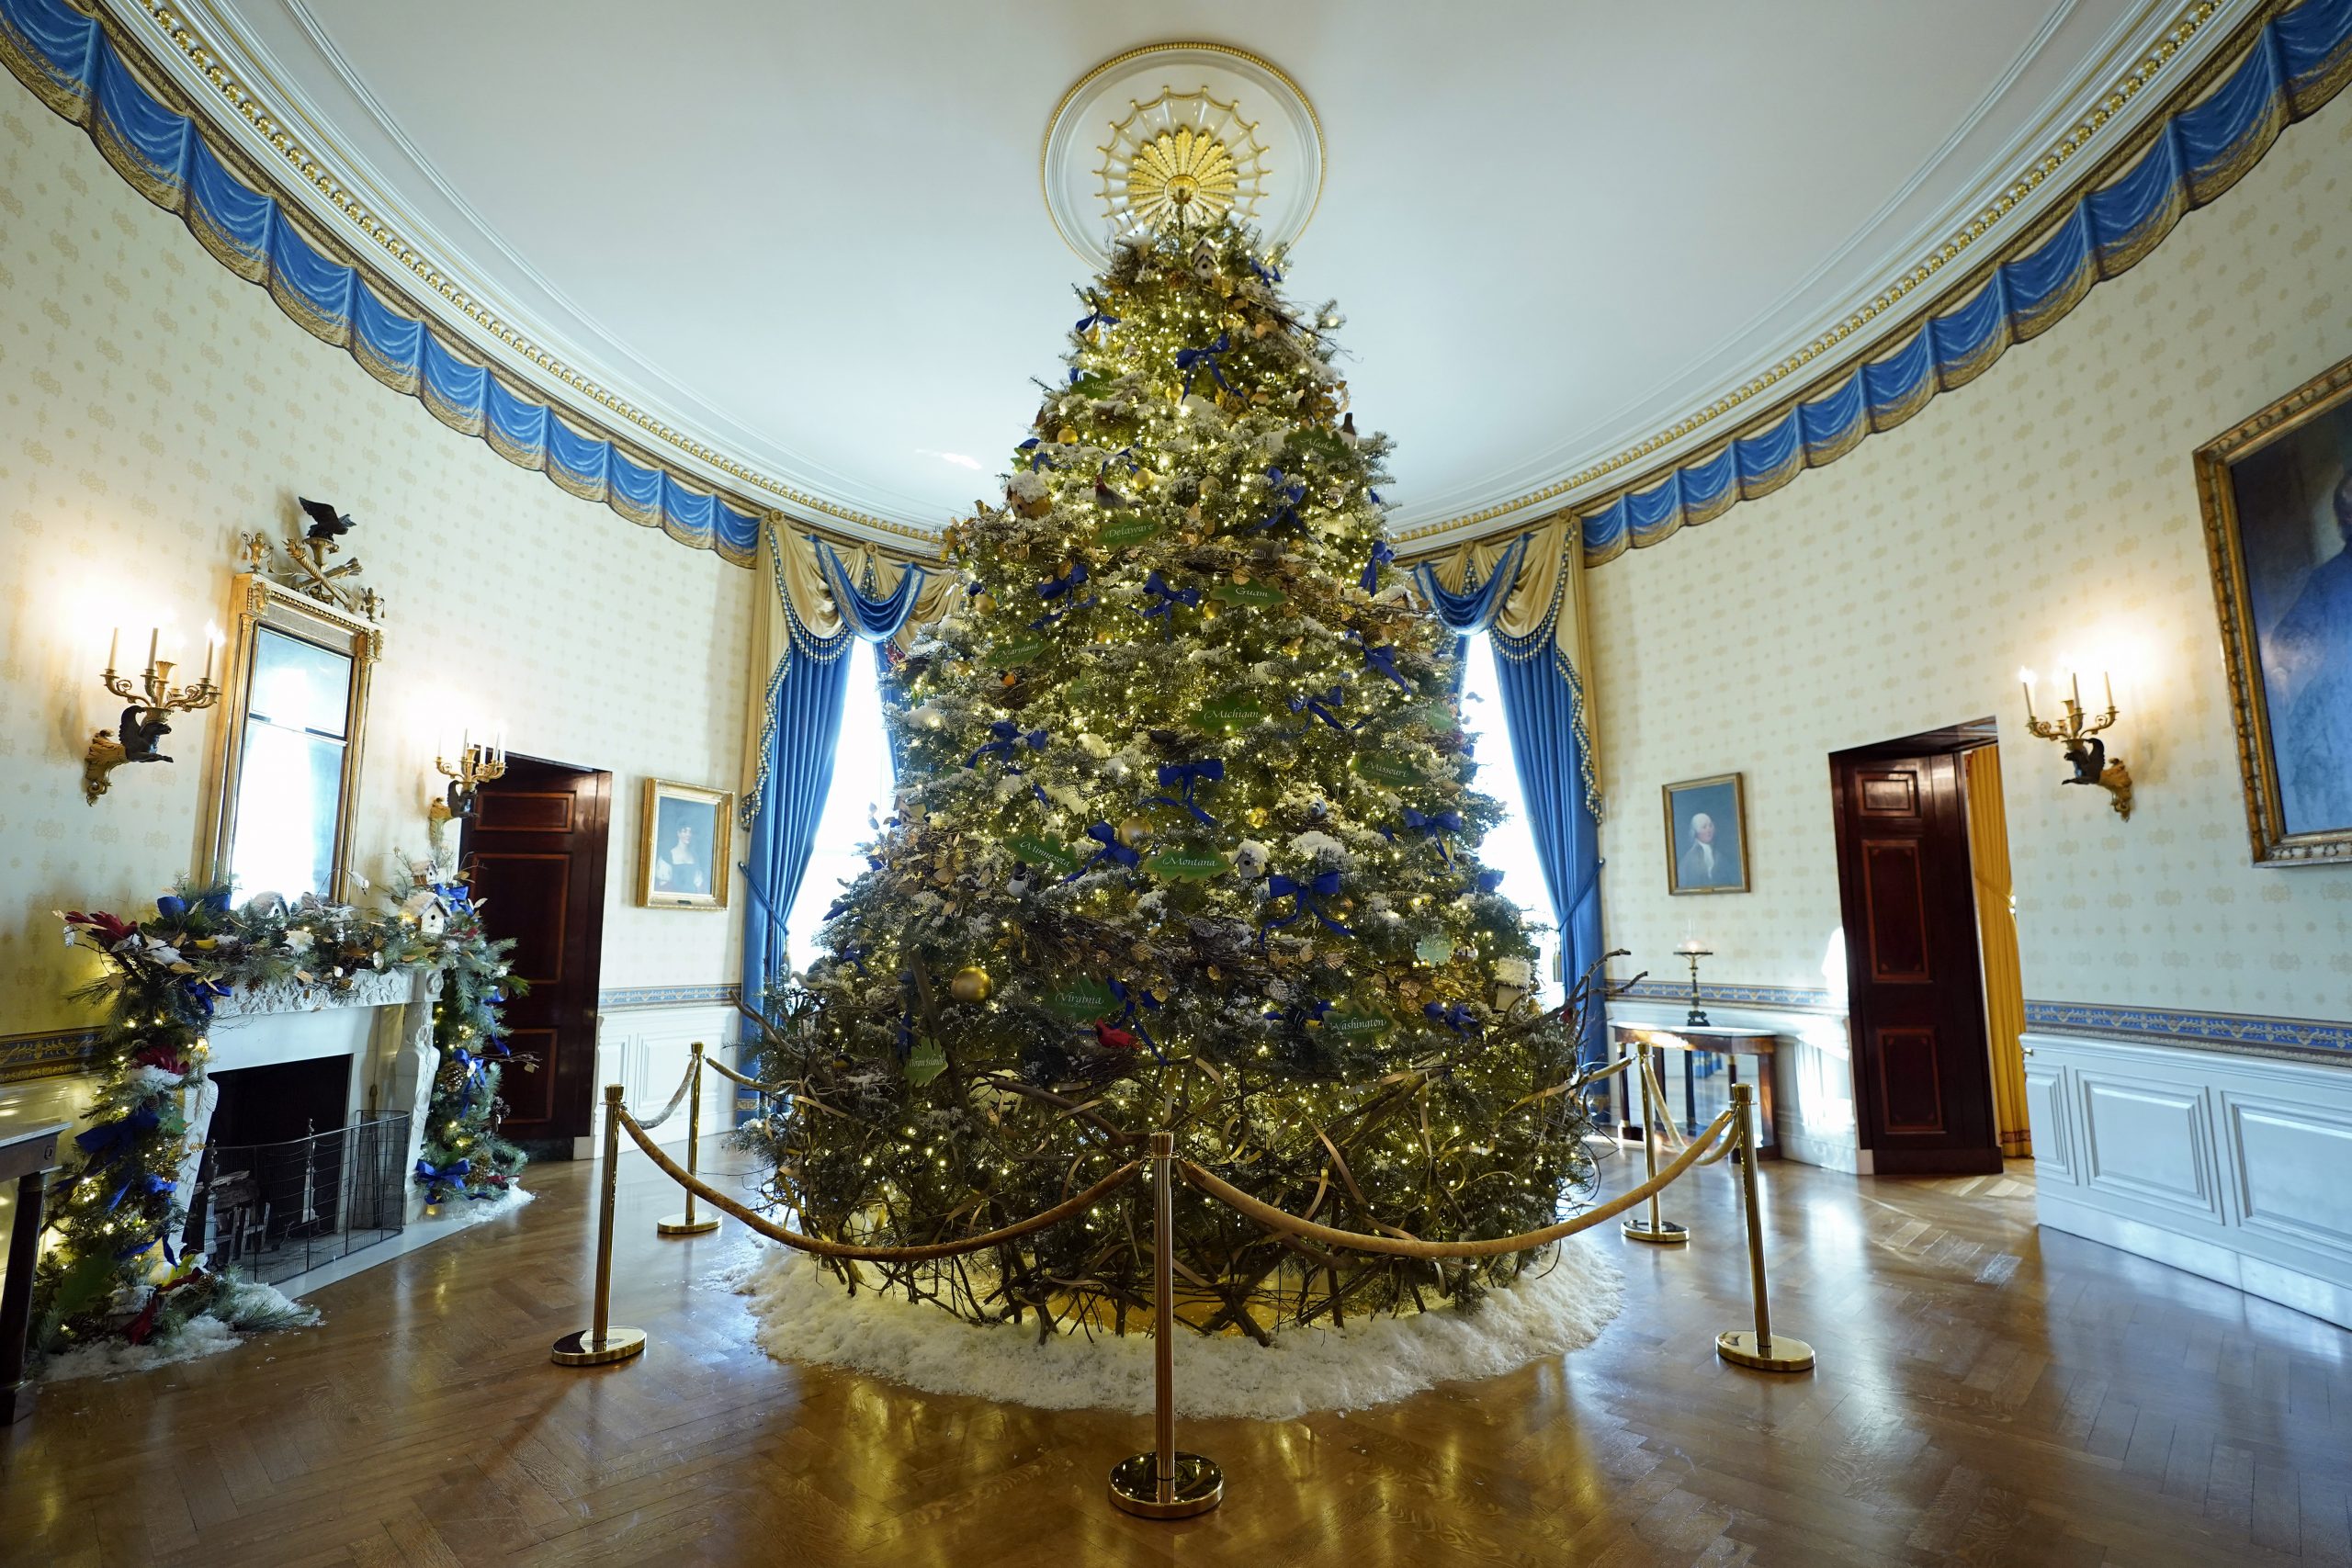 WATCH It’s officially Christmas at the White House as National tree